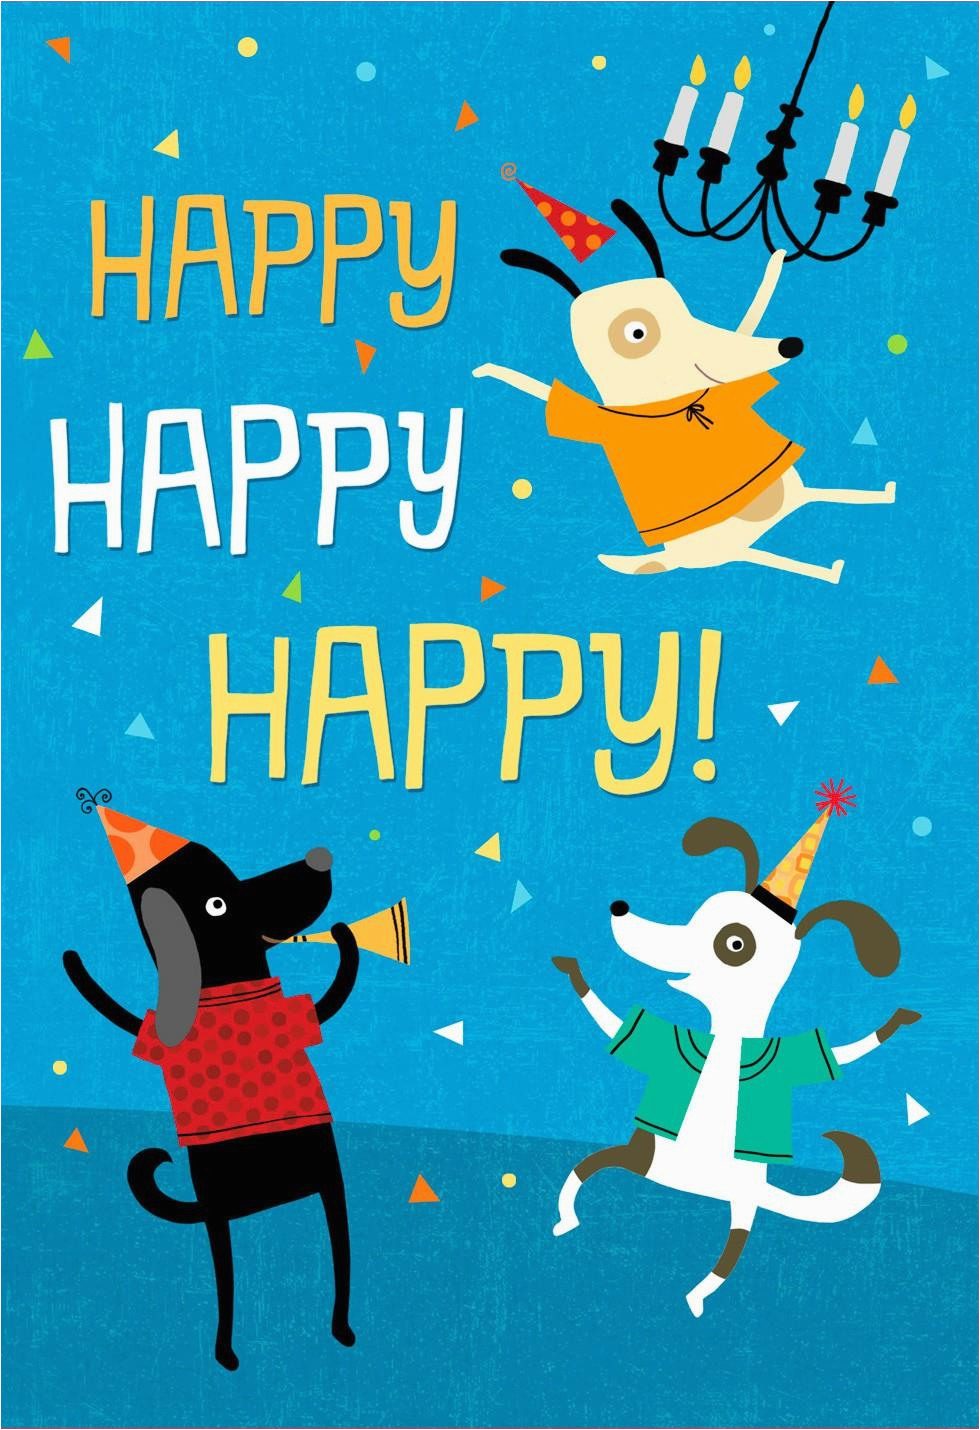 singing-birthday-cards-hallmark-who-let-the-dogs-out-musical-birthday